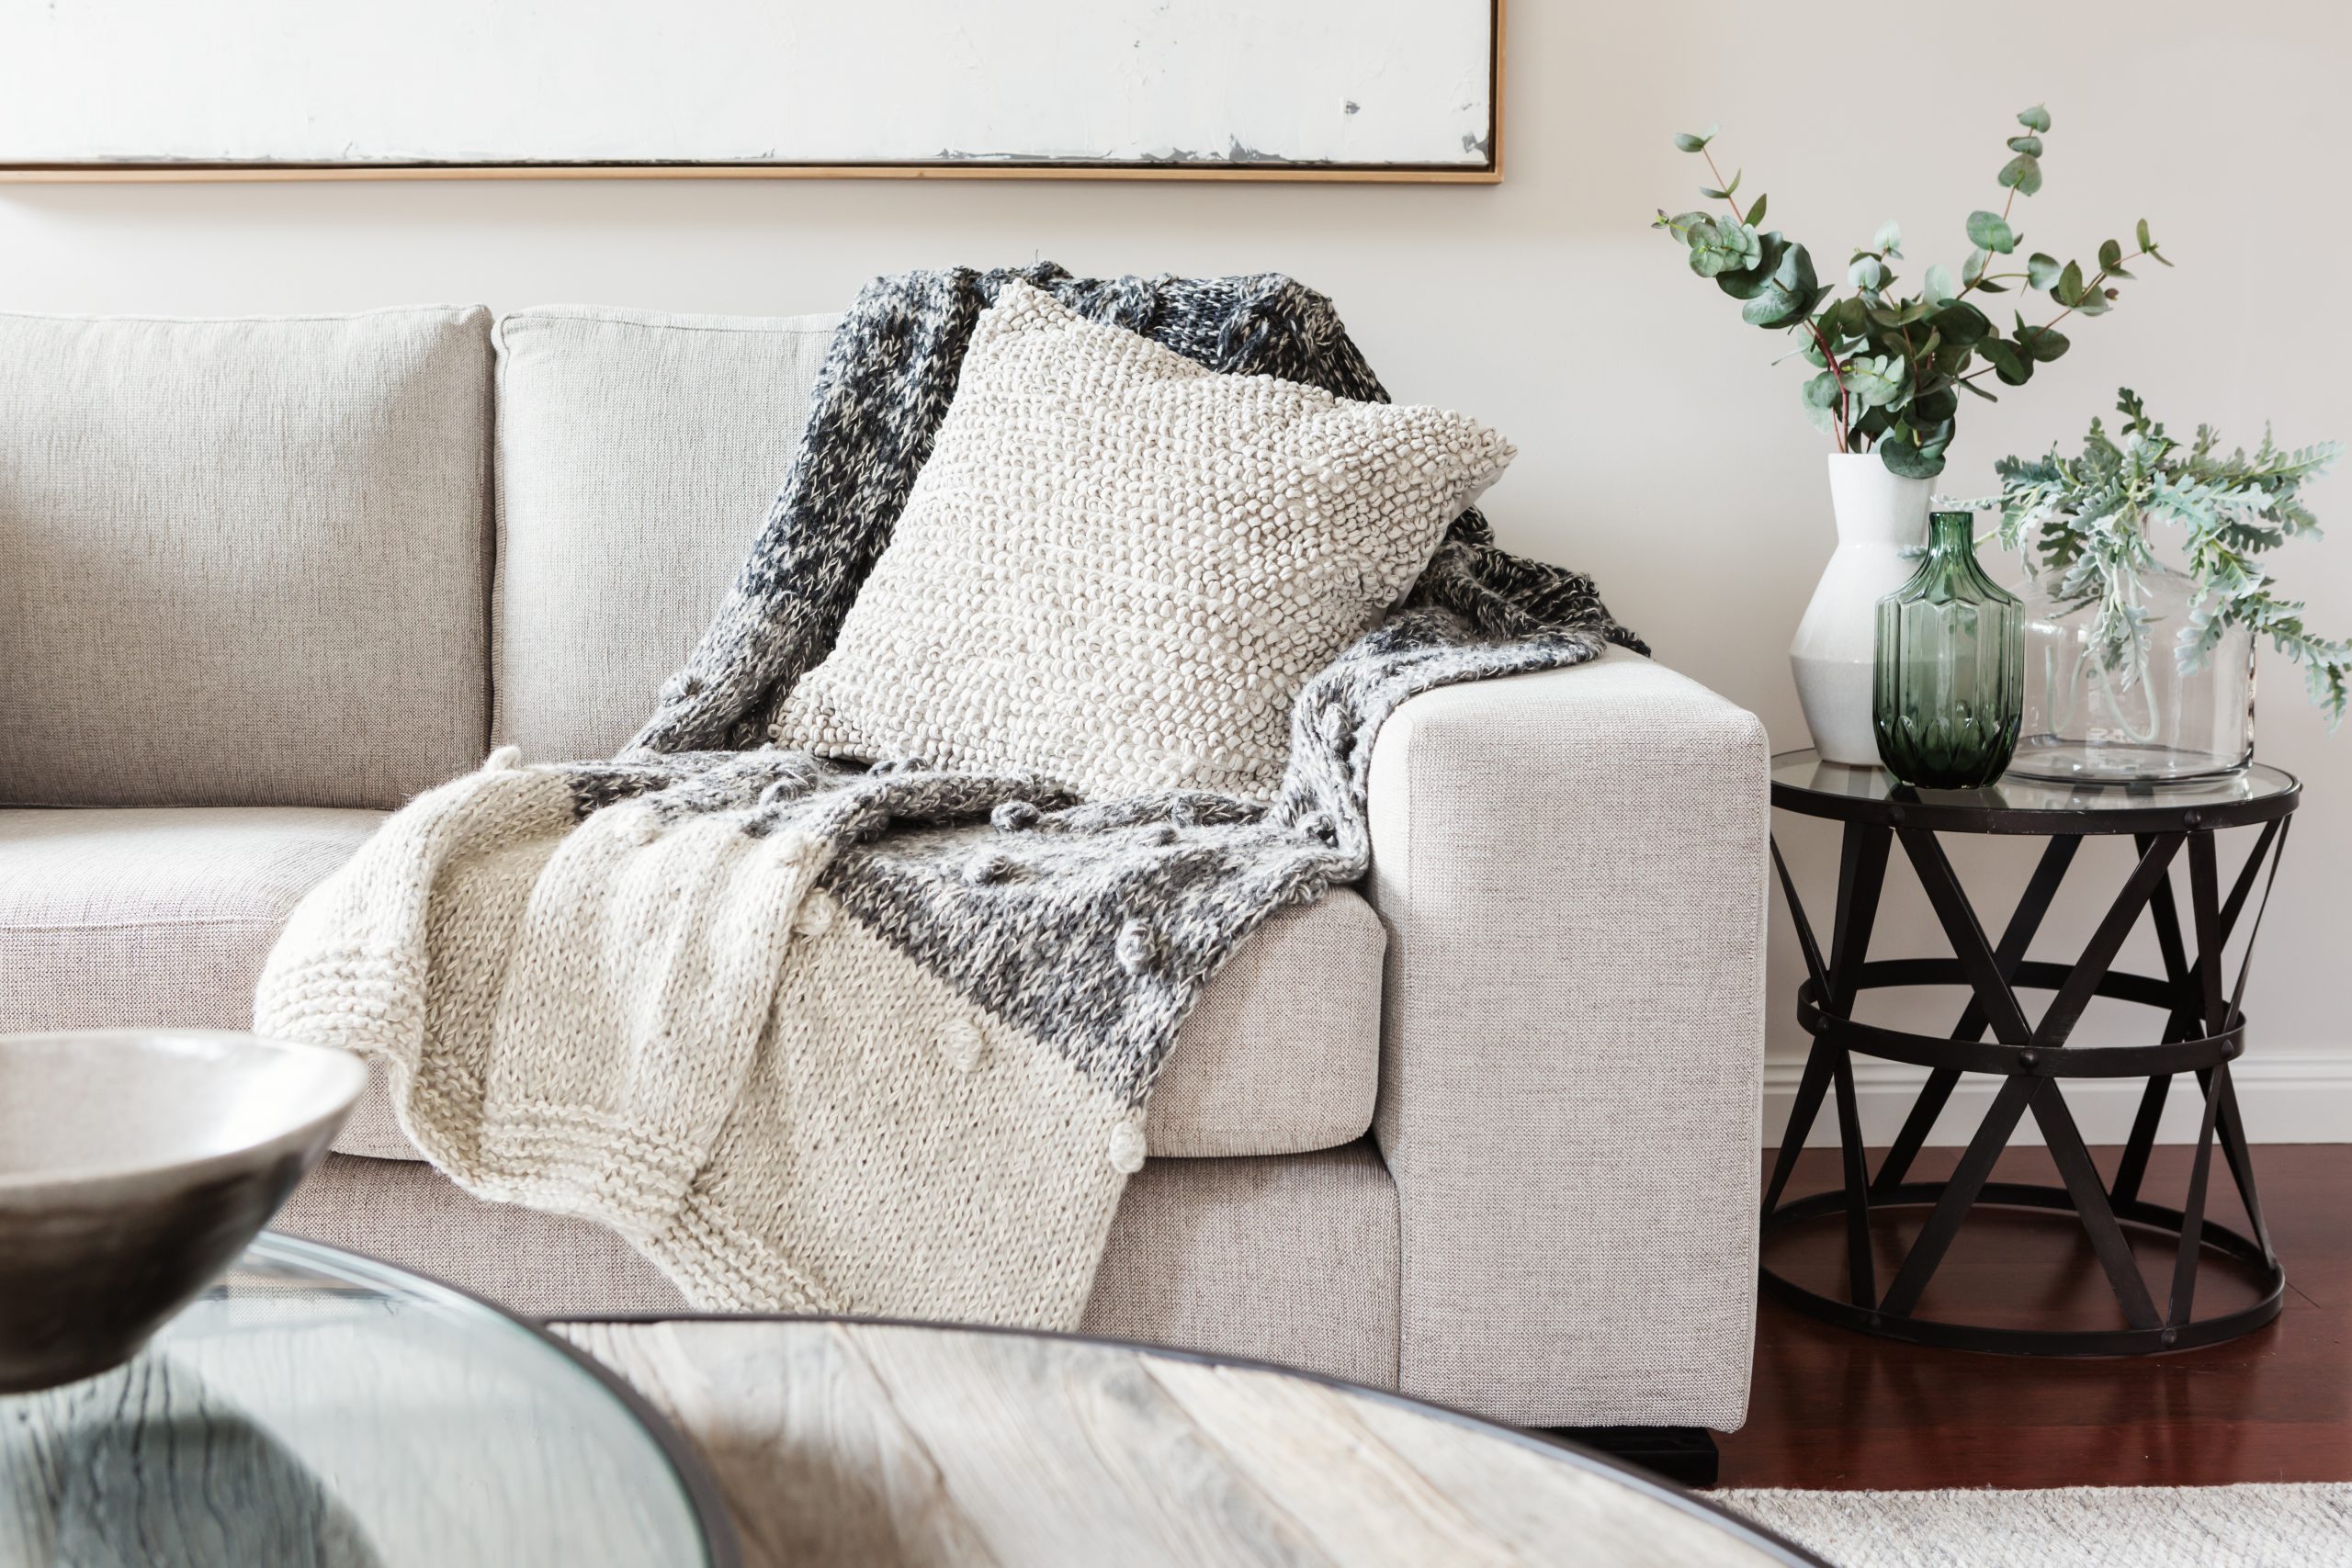 Textured,Layers,Interior,Styling,Of,Cushion,Sofa,And,Throw,In